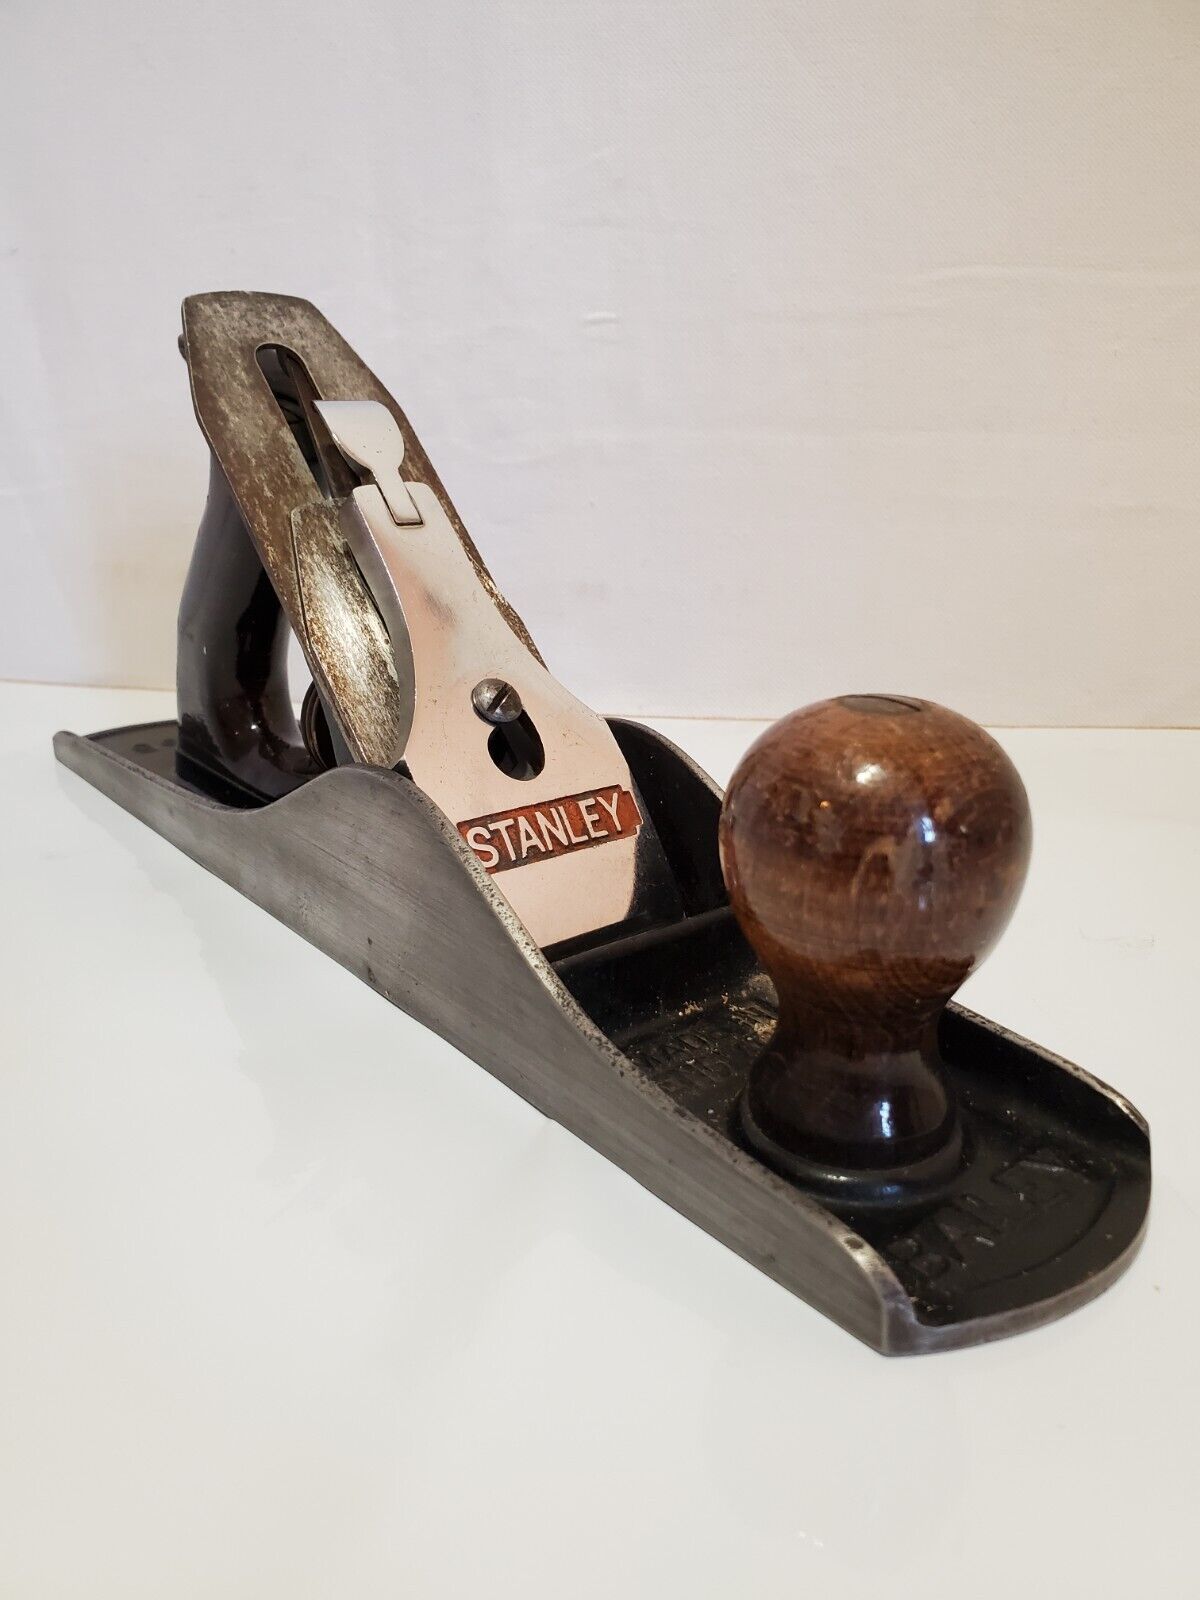 Vintage Stanley Bailey No 5 Jack Plane. Made in England.